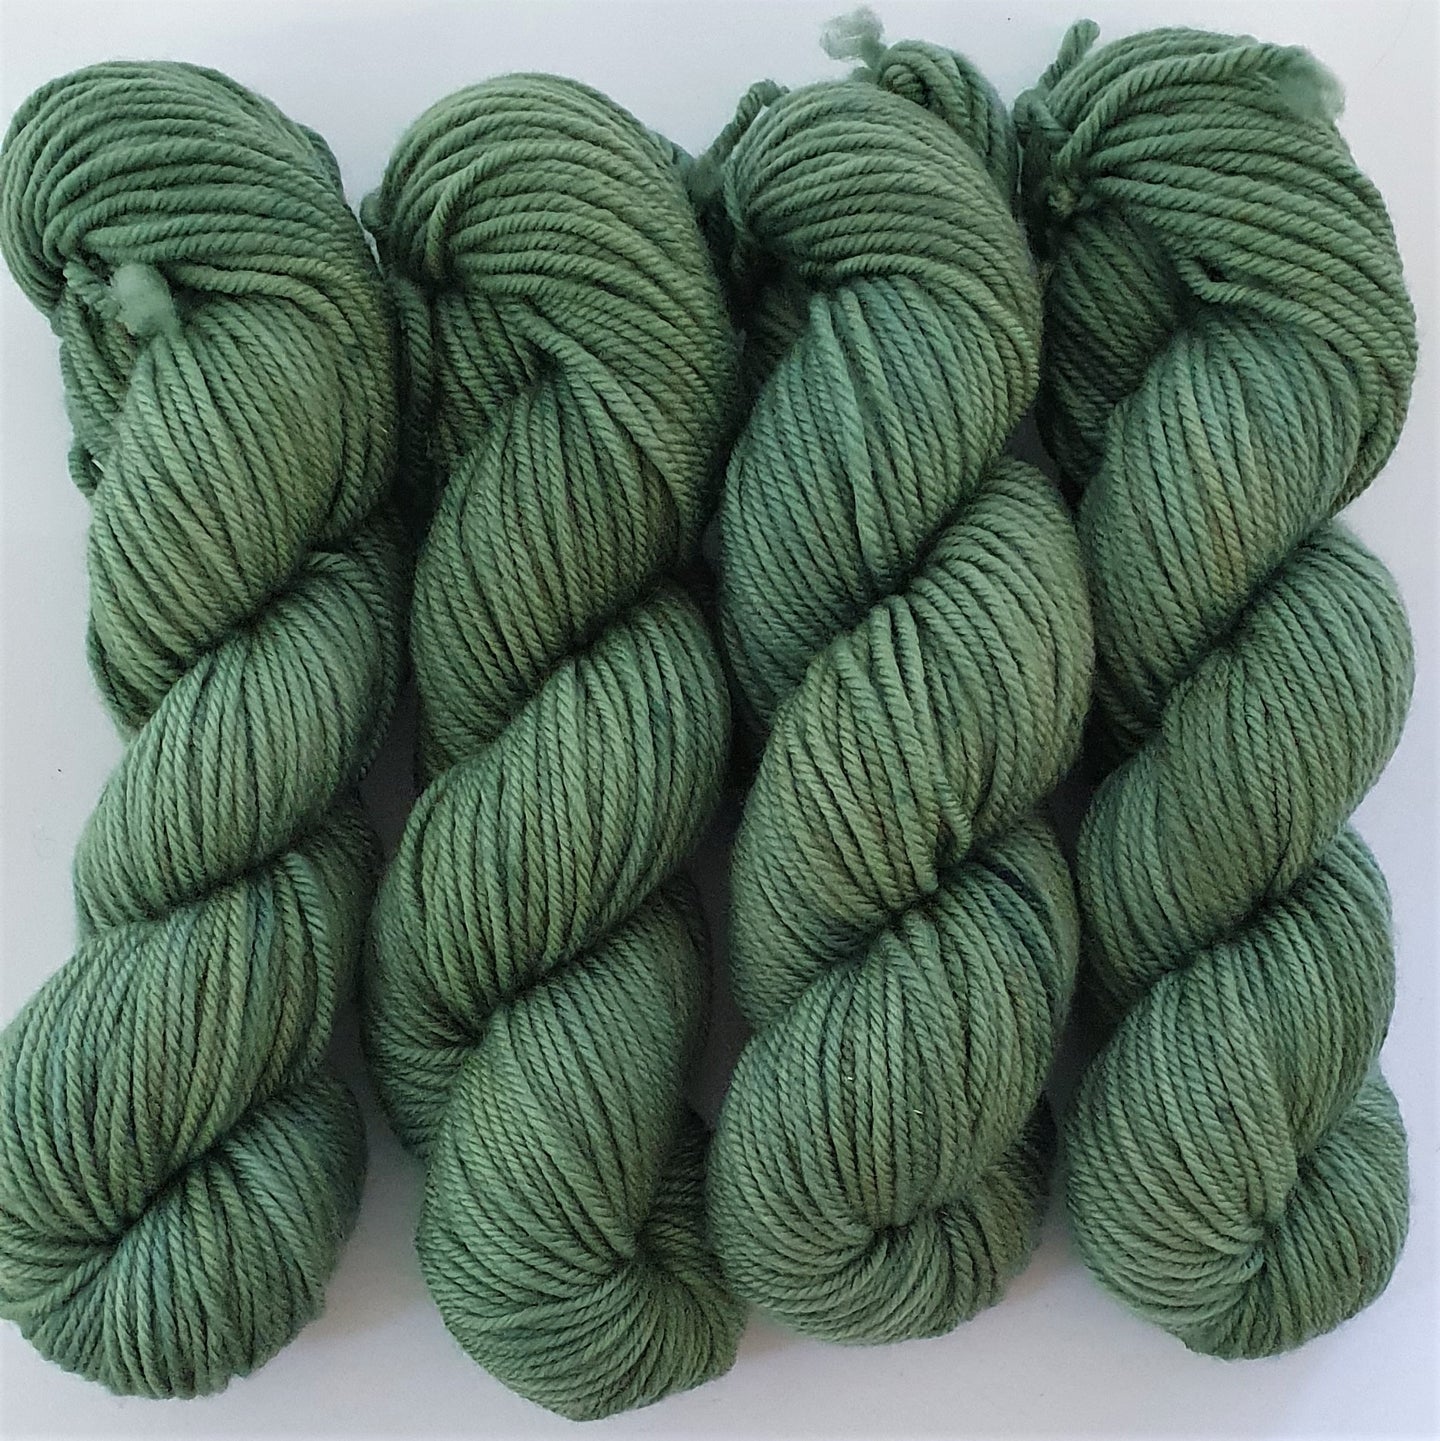 Pine (Wyvern Worsted 12ply)